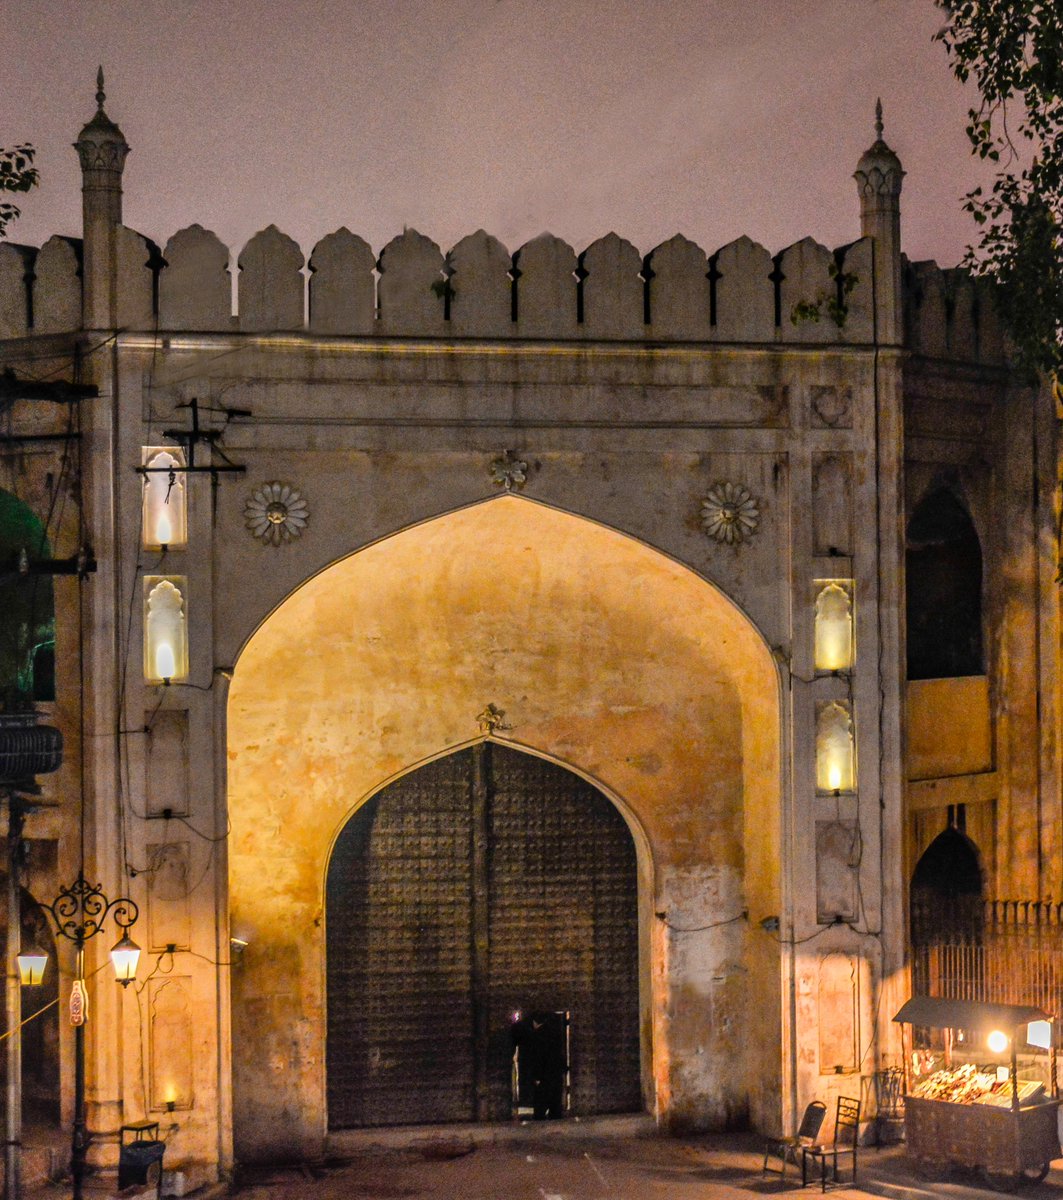 Roshnai Gate, one of the 13 gates within the Walled City of Lahore in Punjab, Pakistan. 
It was the main entry into Lahore for emperors and nobles during the Mughal, and later Sikh period.
📷 Muhammad Ashar (Wikipedia)

#Lahore #Pakistan #MughalEra